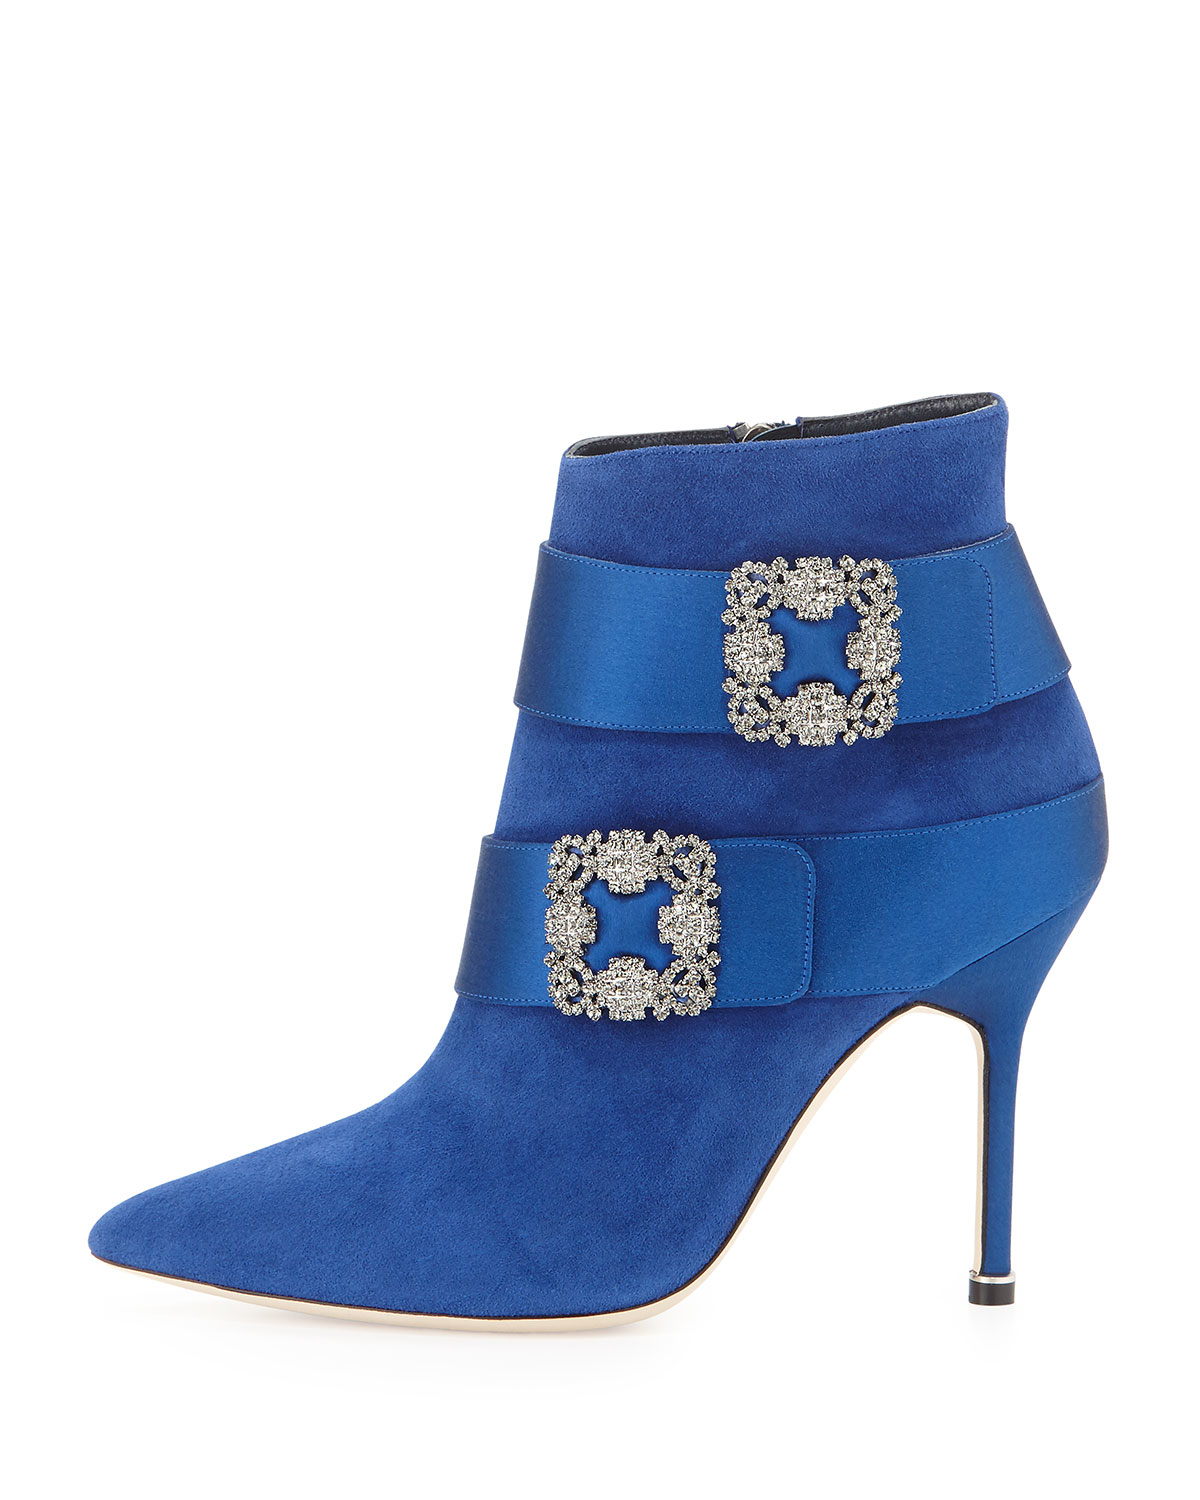 Lyst - Manolo Blahnik Hangisi Suede Ankle Boot in Blue